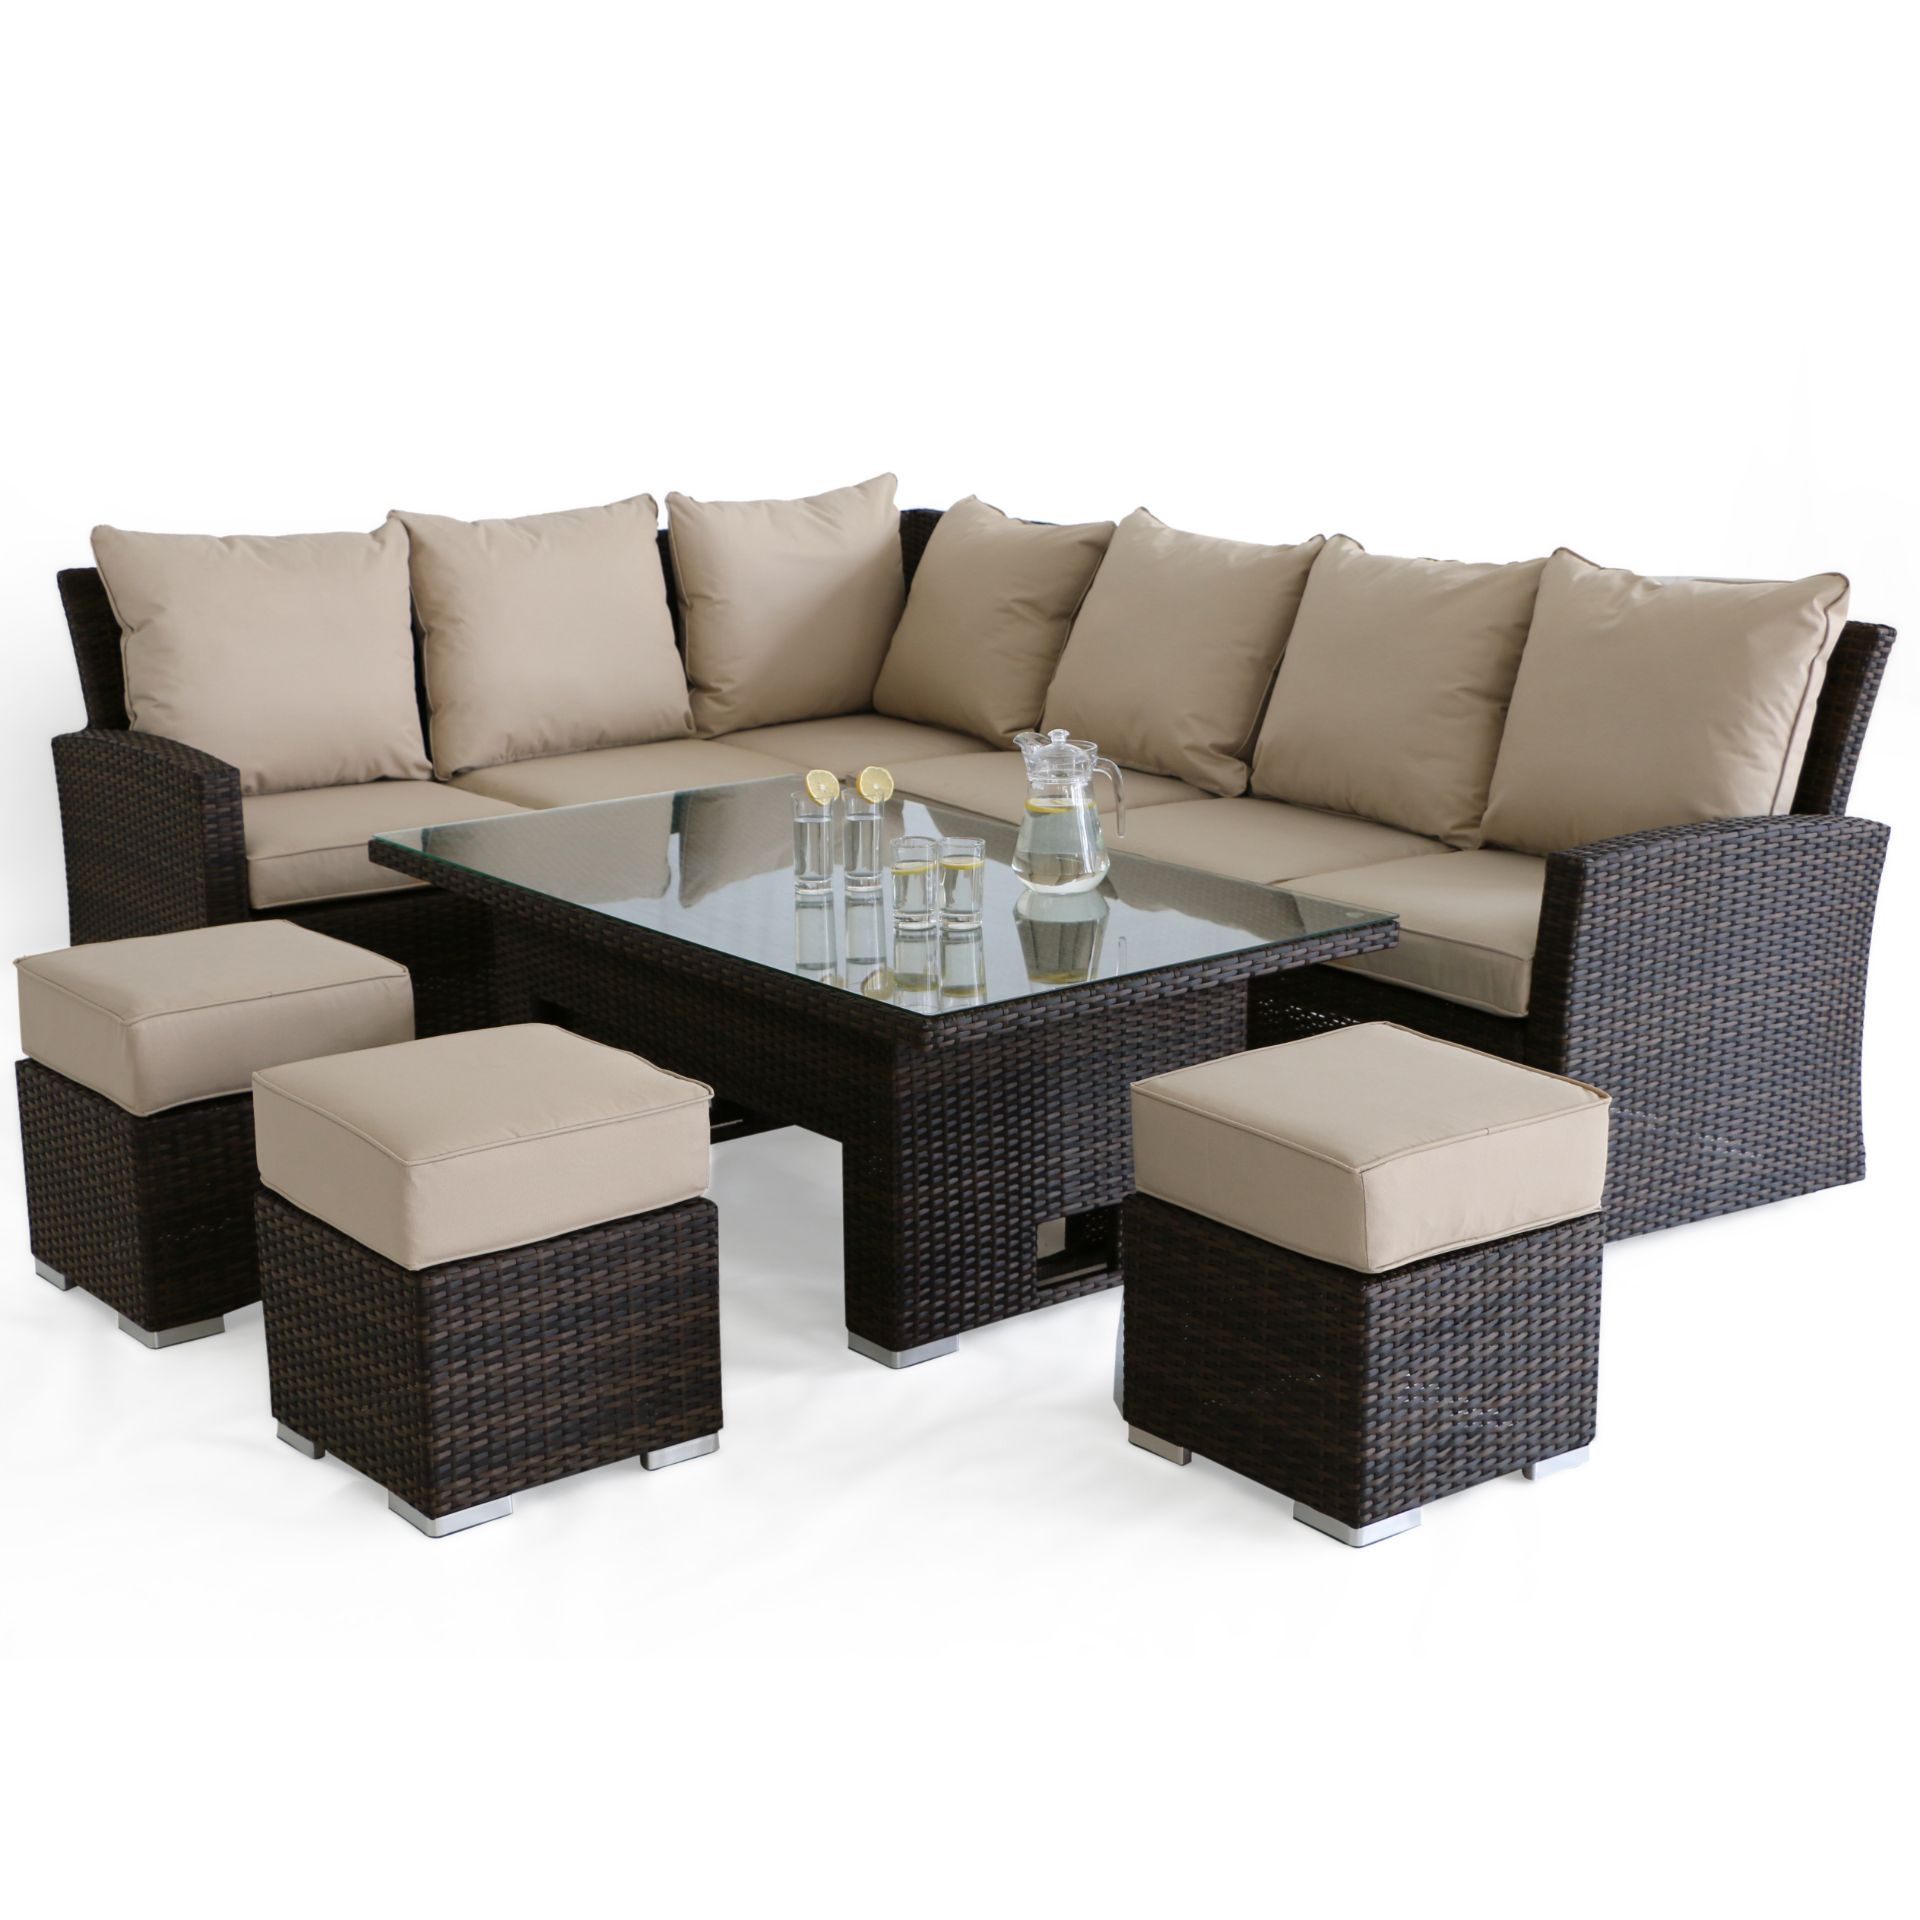 Rattan Kingston Corner Dining Set With Rising Table (Brown) *BRAND NEW* - Image 7 of 8